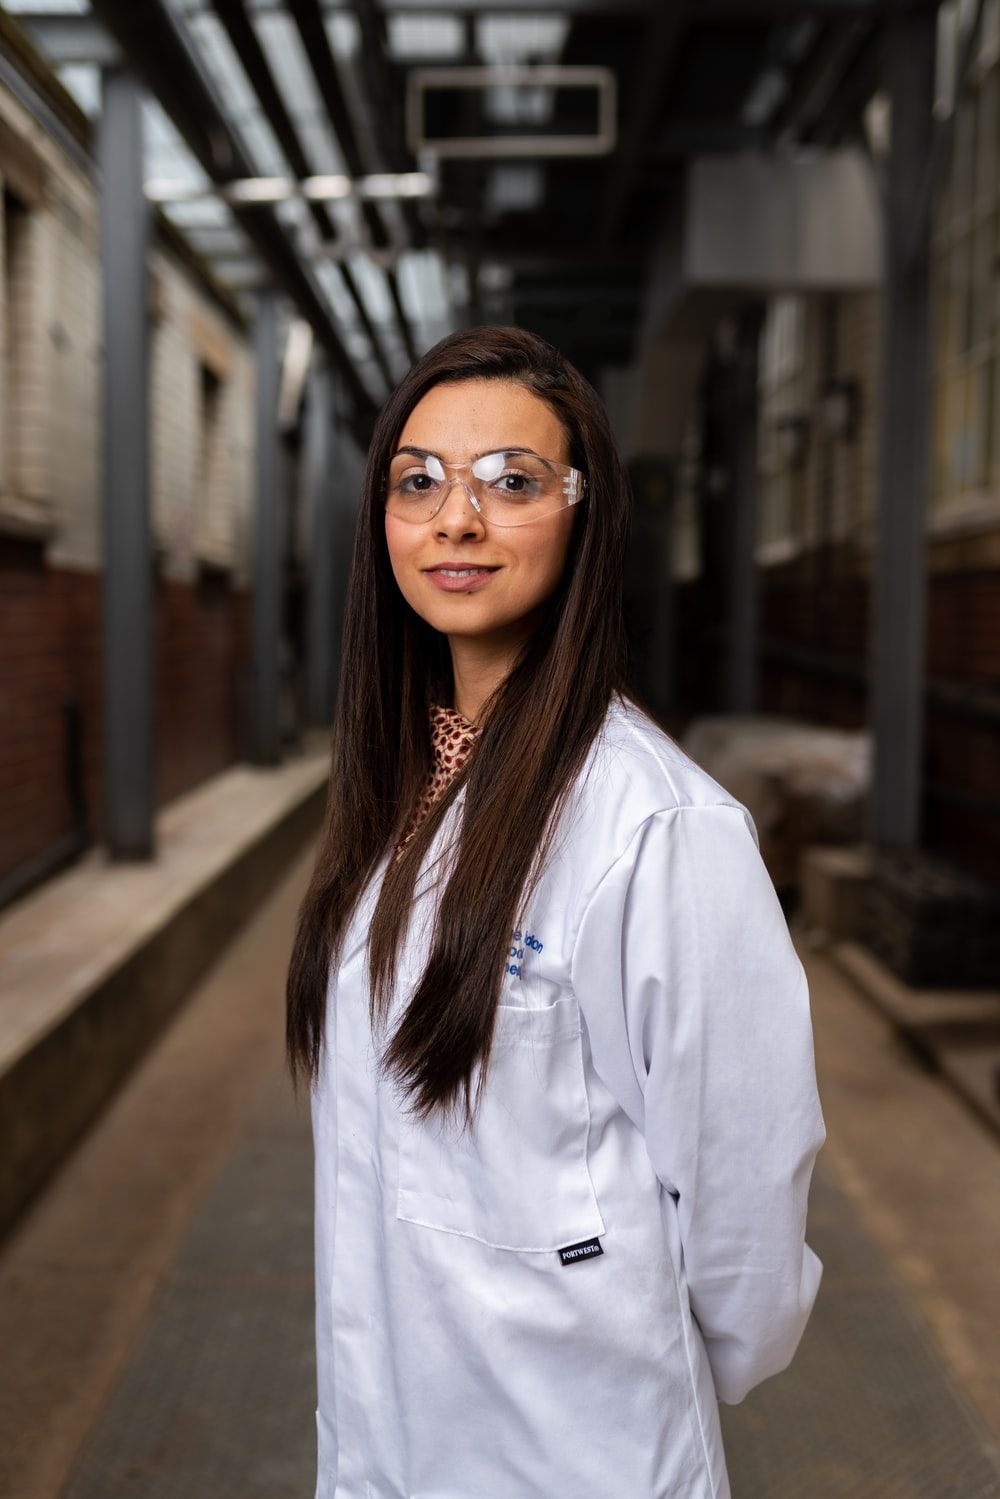 Female Scientist Picture. Download Free Image